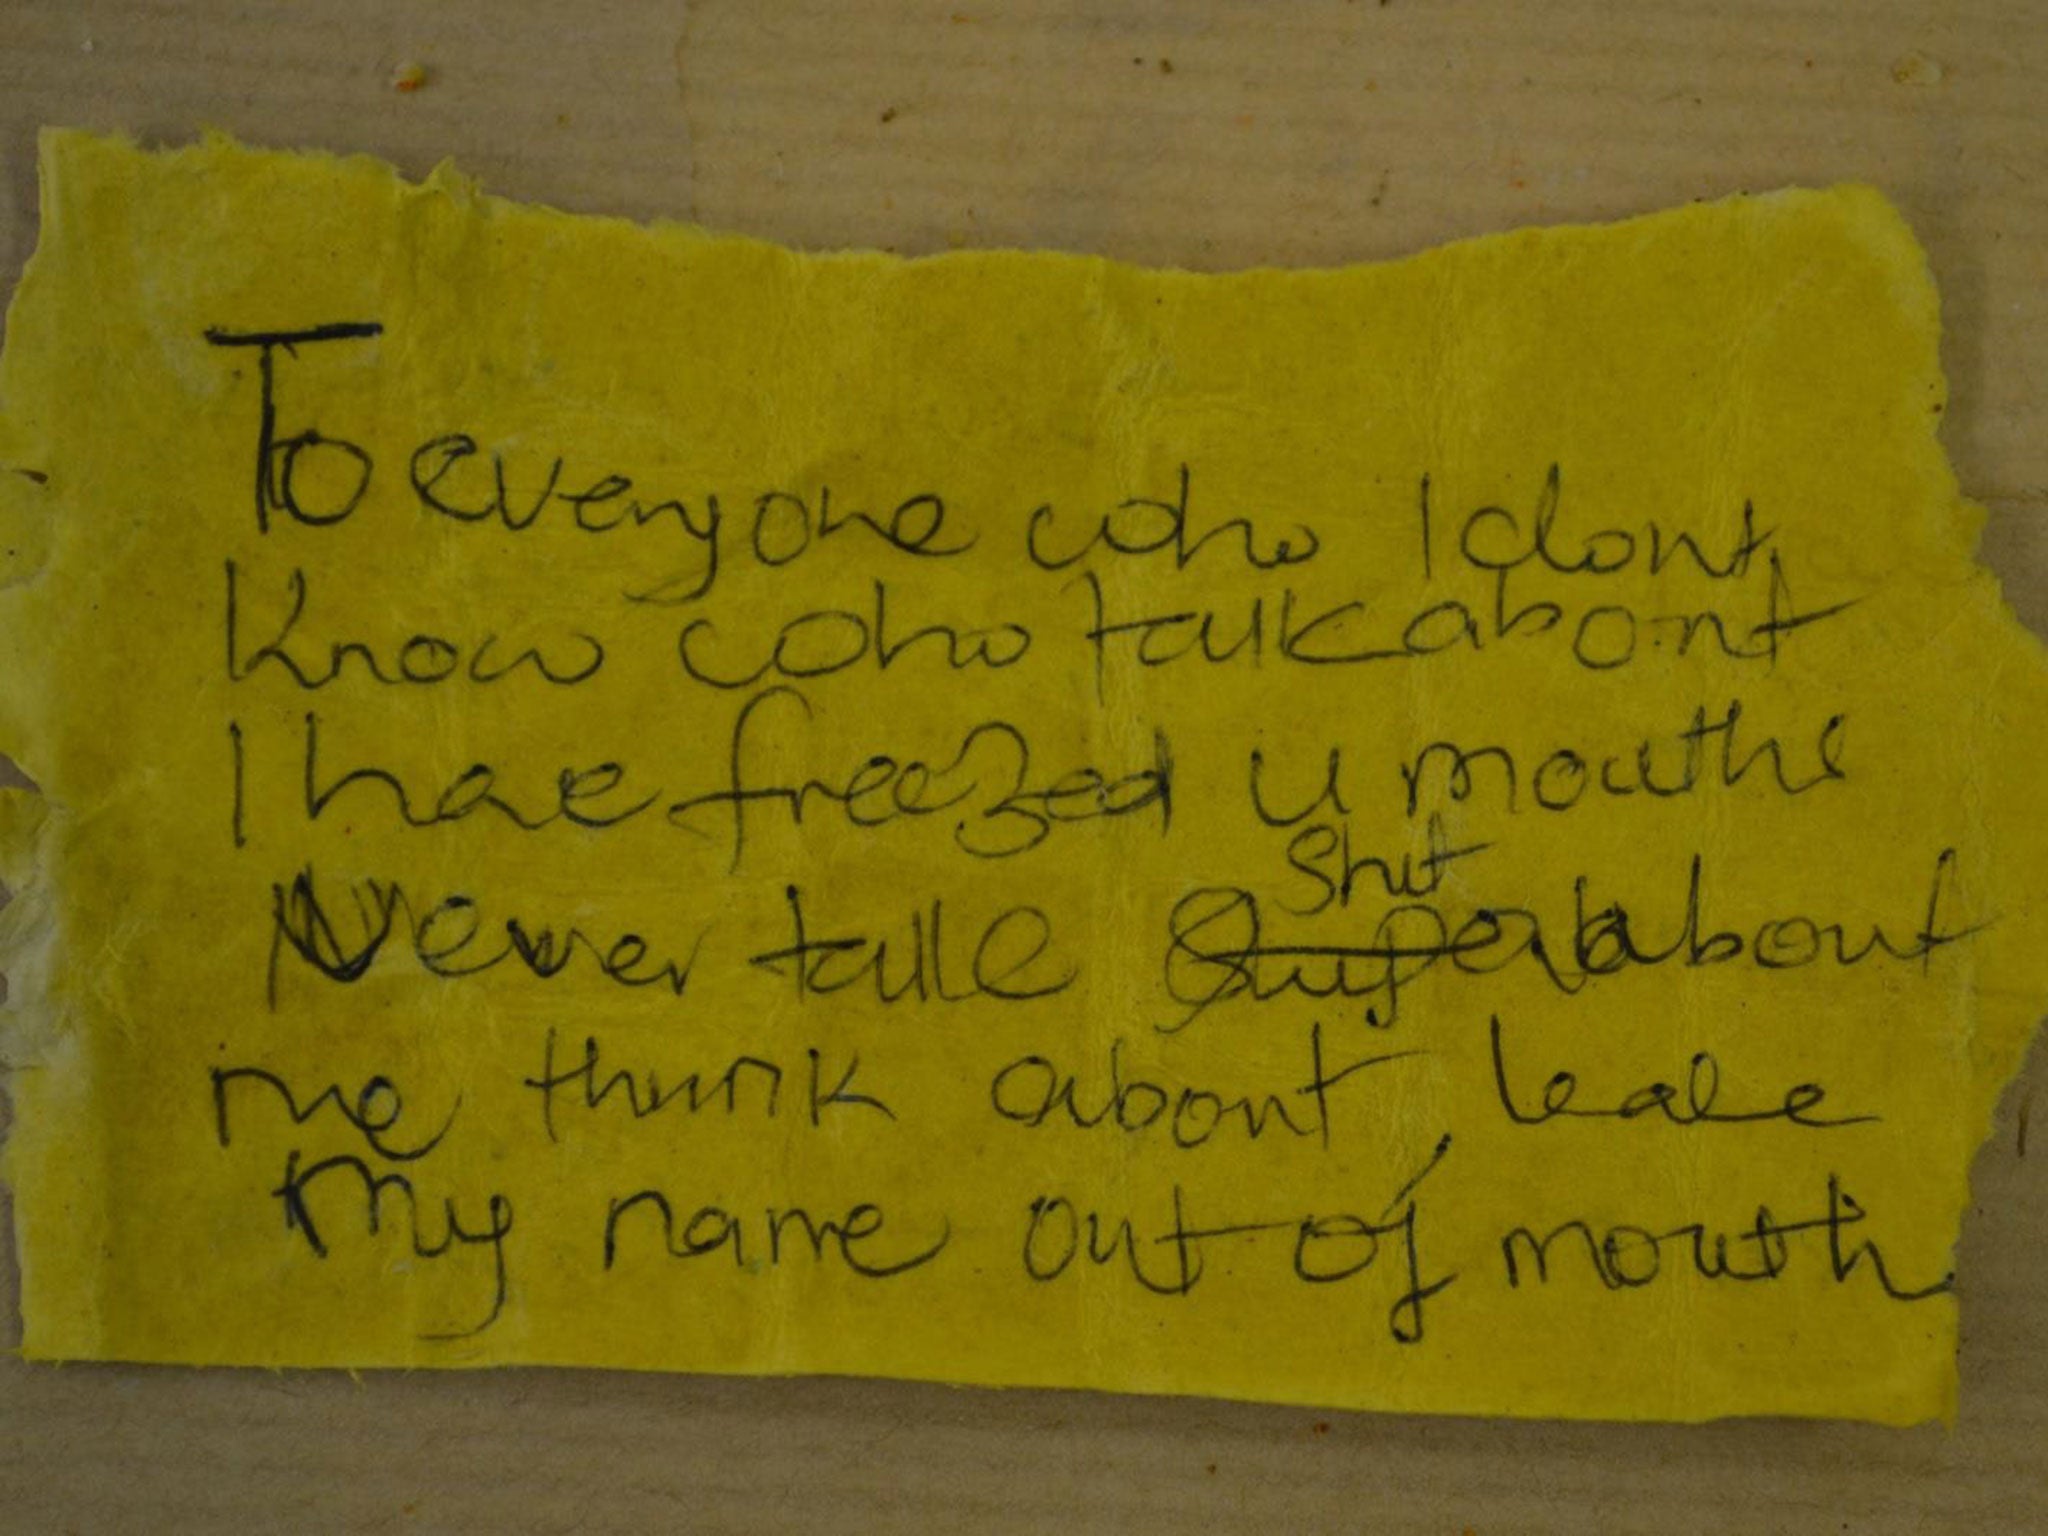 One of the notes left in a lime by the girl’s mother as an attempted spell